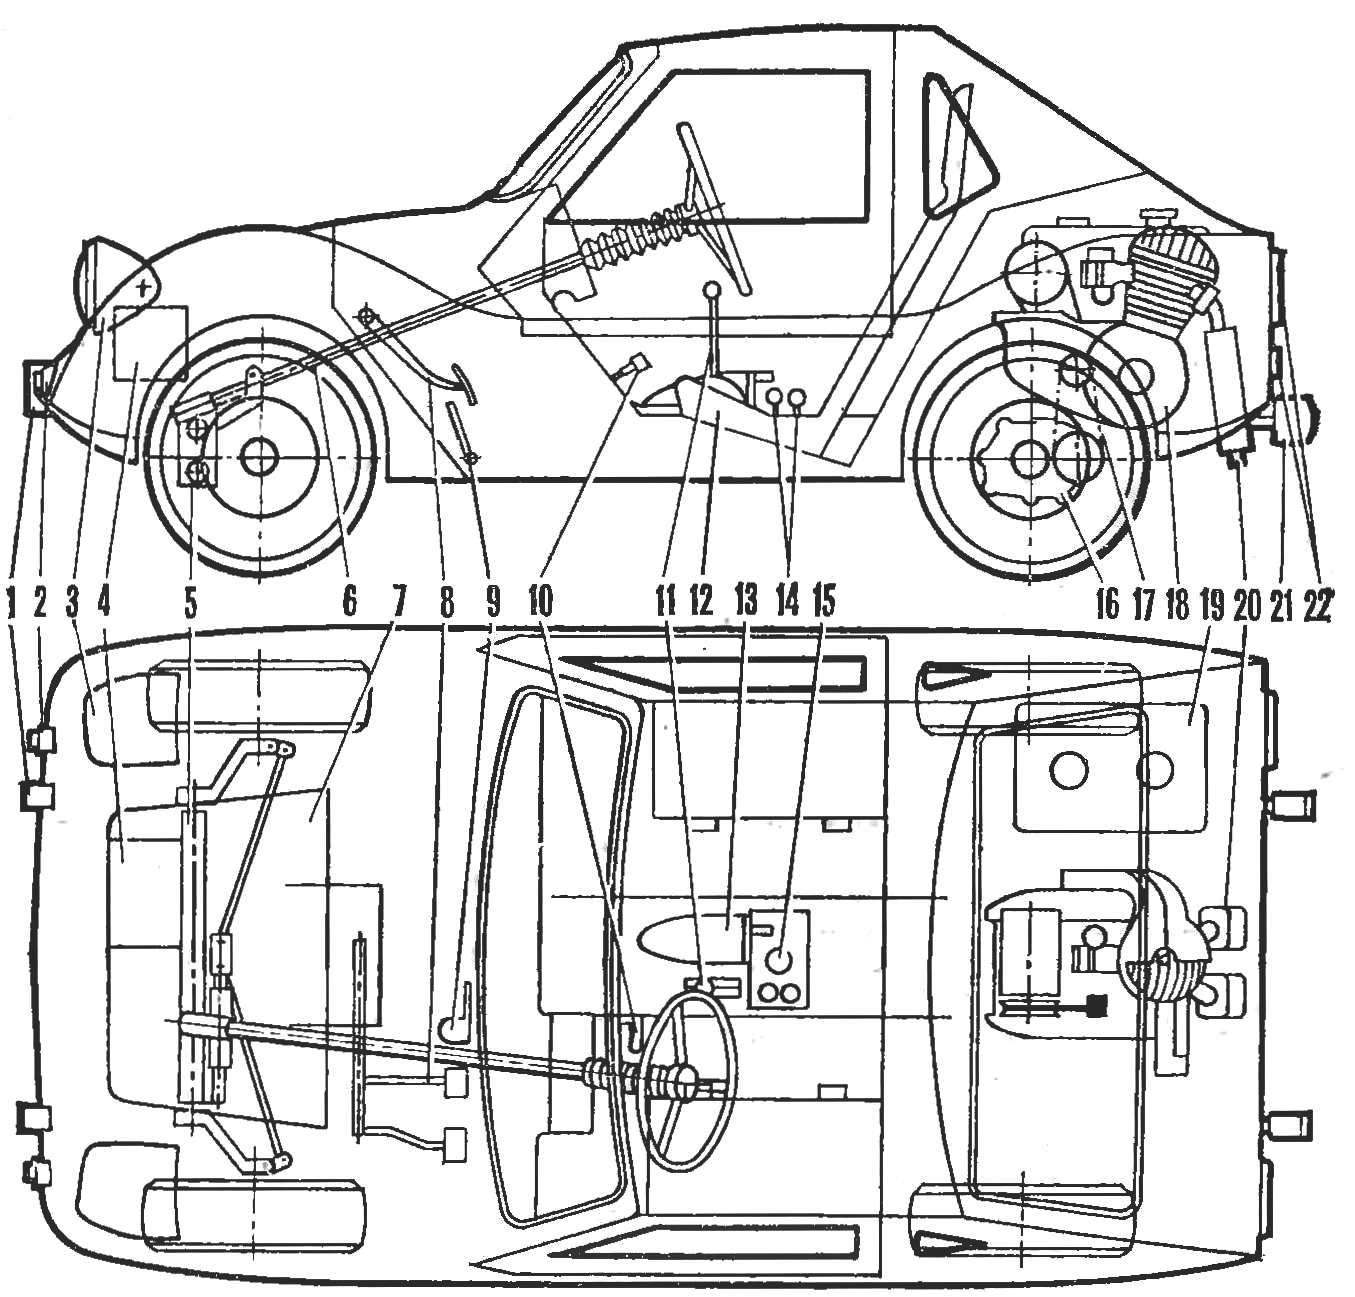 Fig. 2. The layout of the car